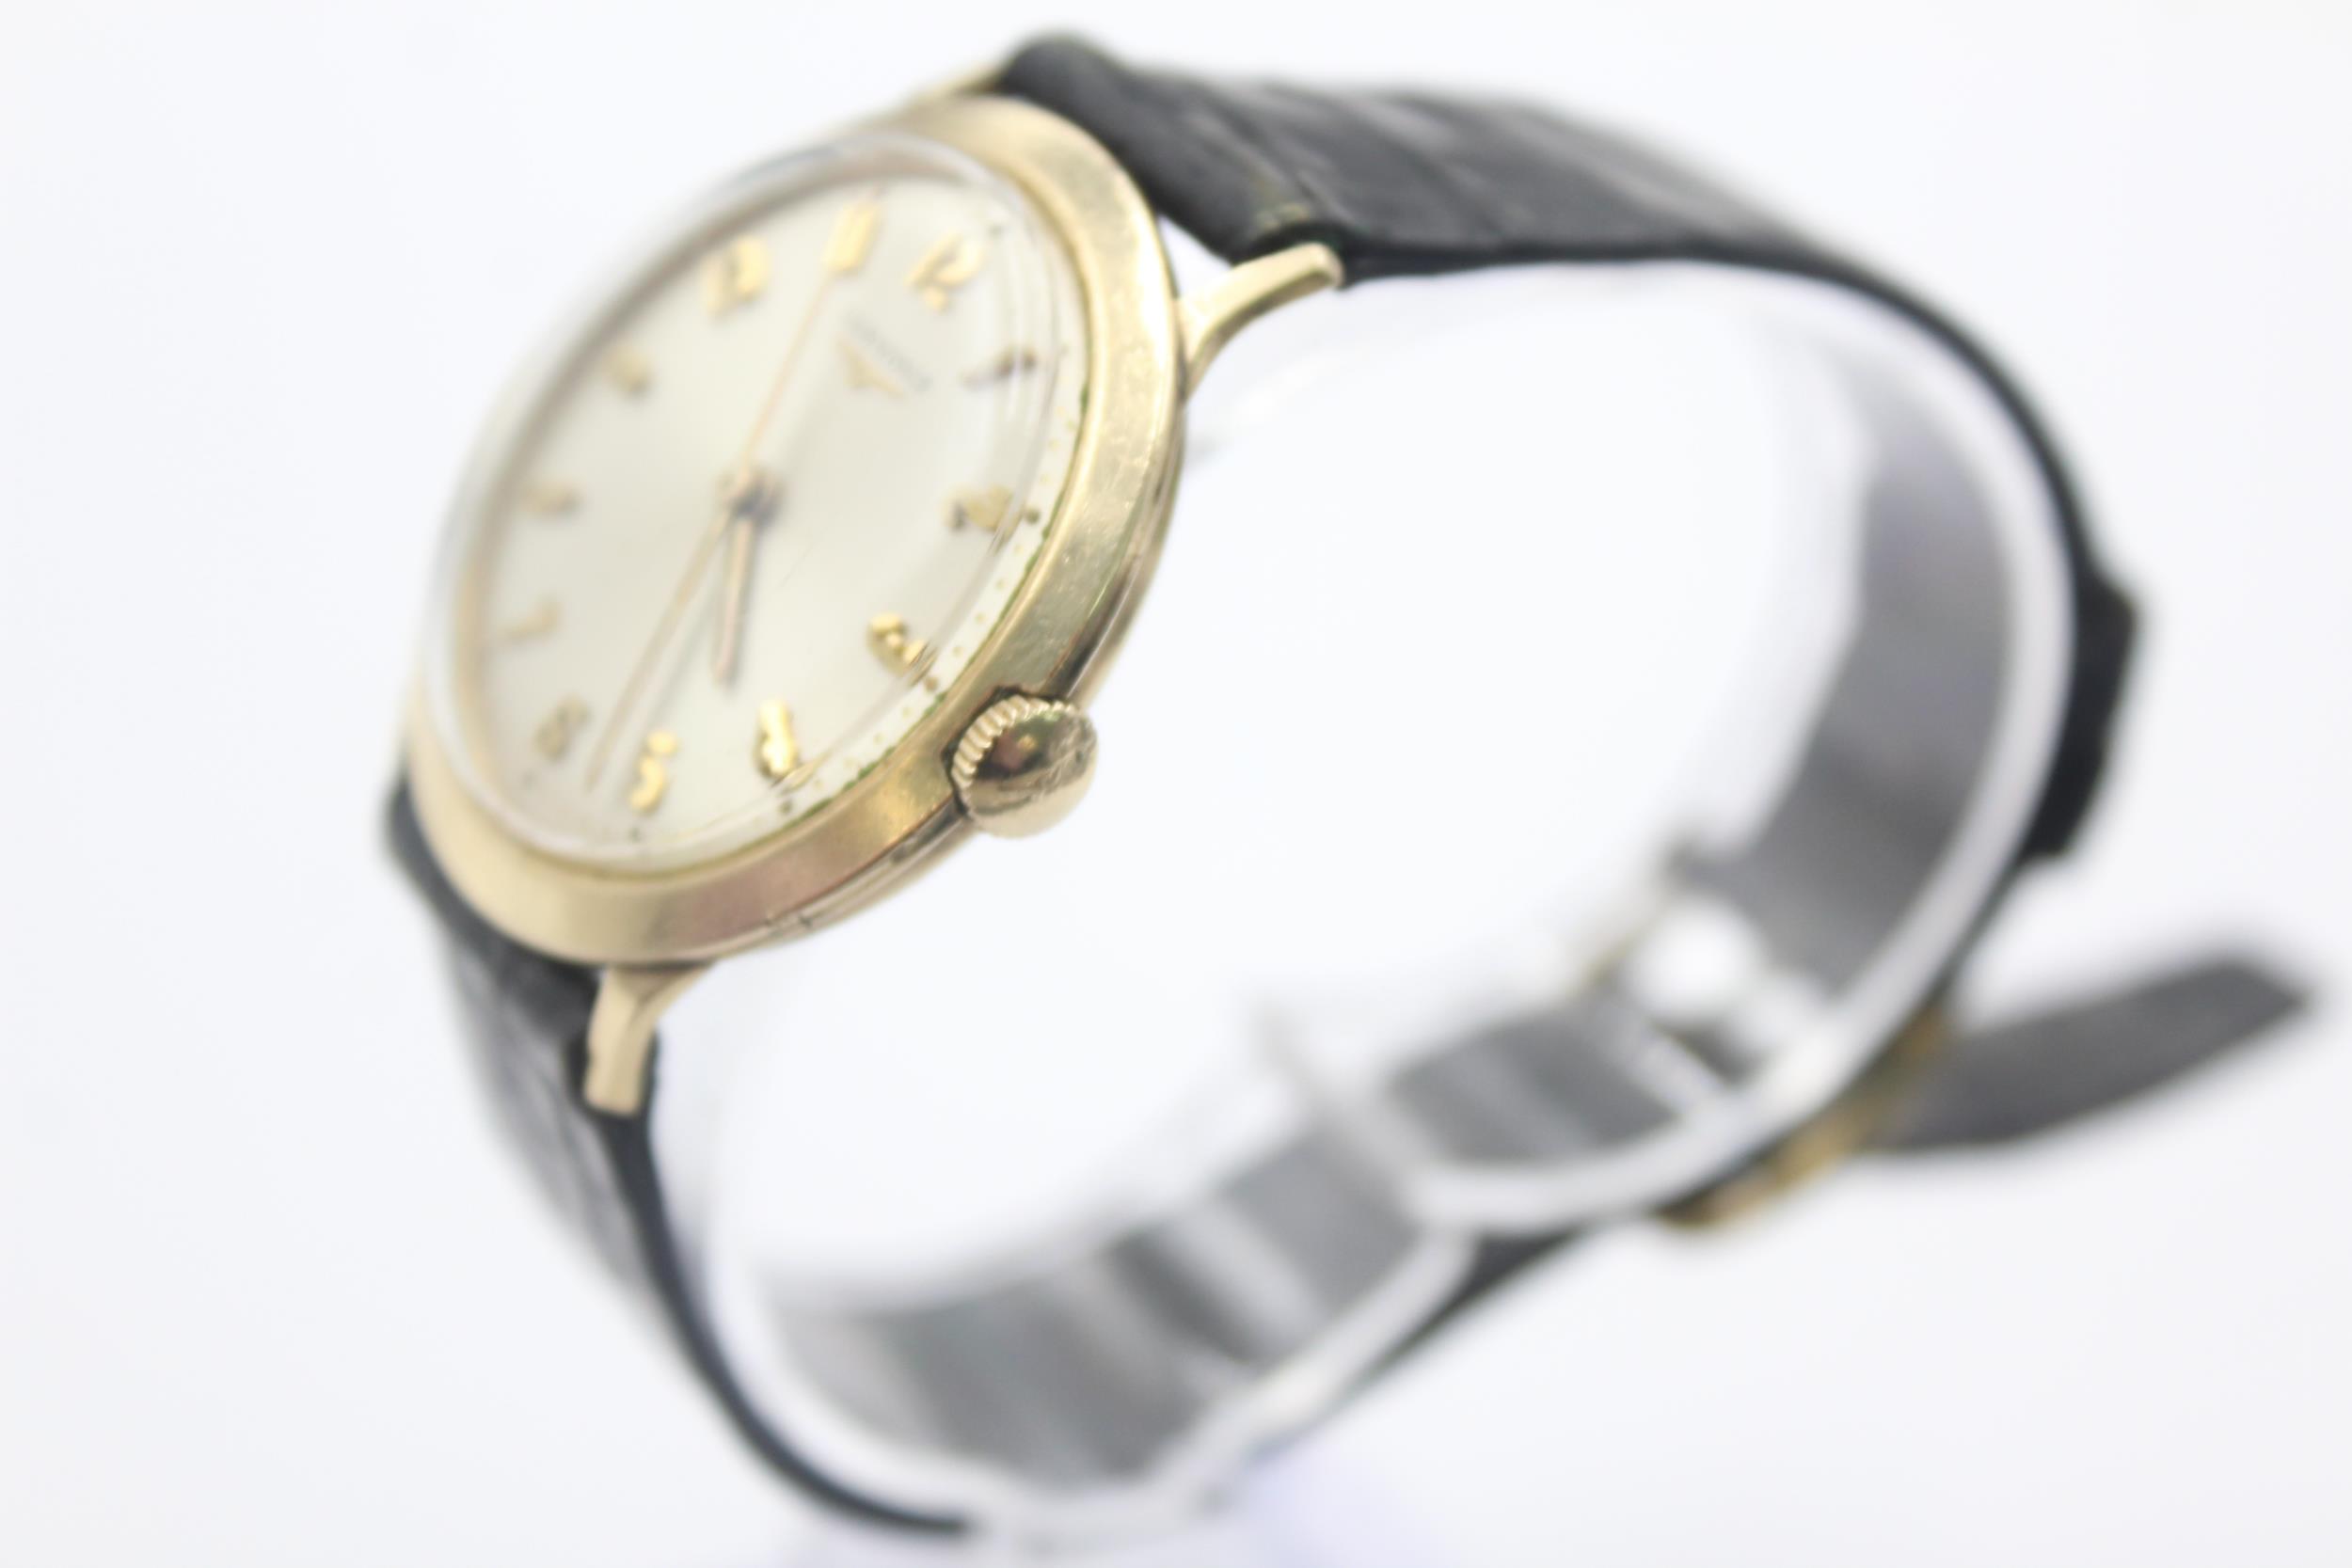 Vintage Gents LONGINES 10k Gold Capped Dress Style WRISTWATCH Hand-Wind WORKING - Image 3 of 5